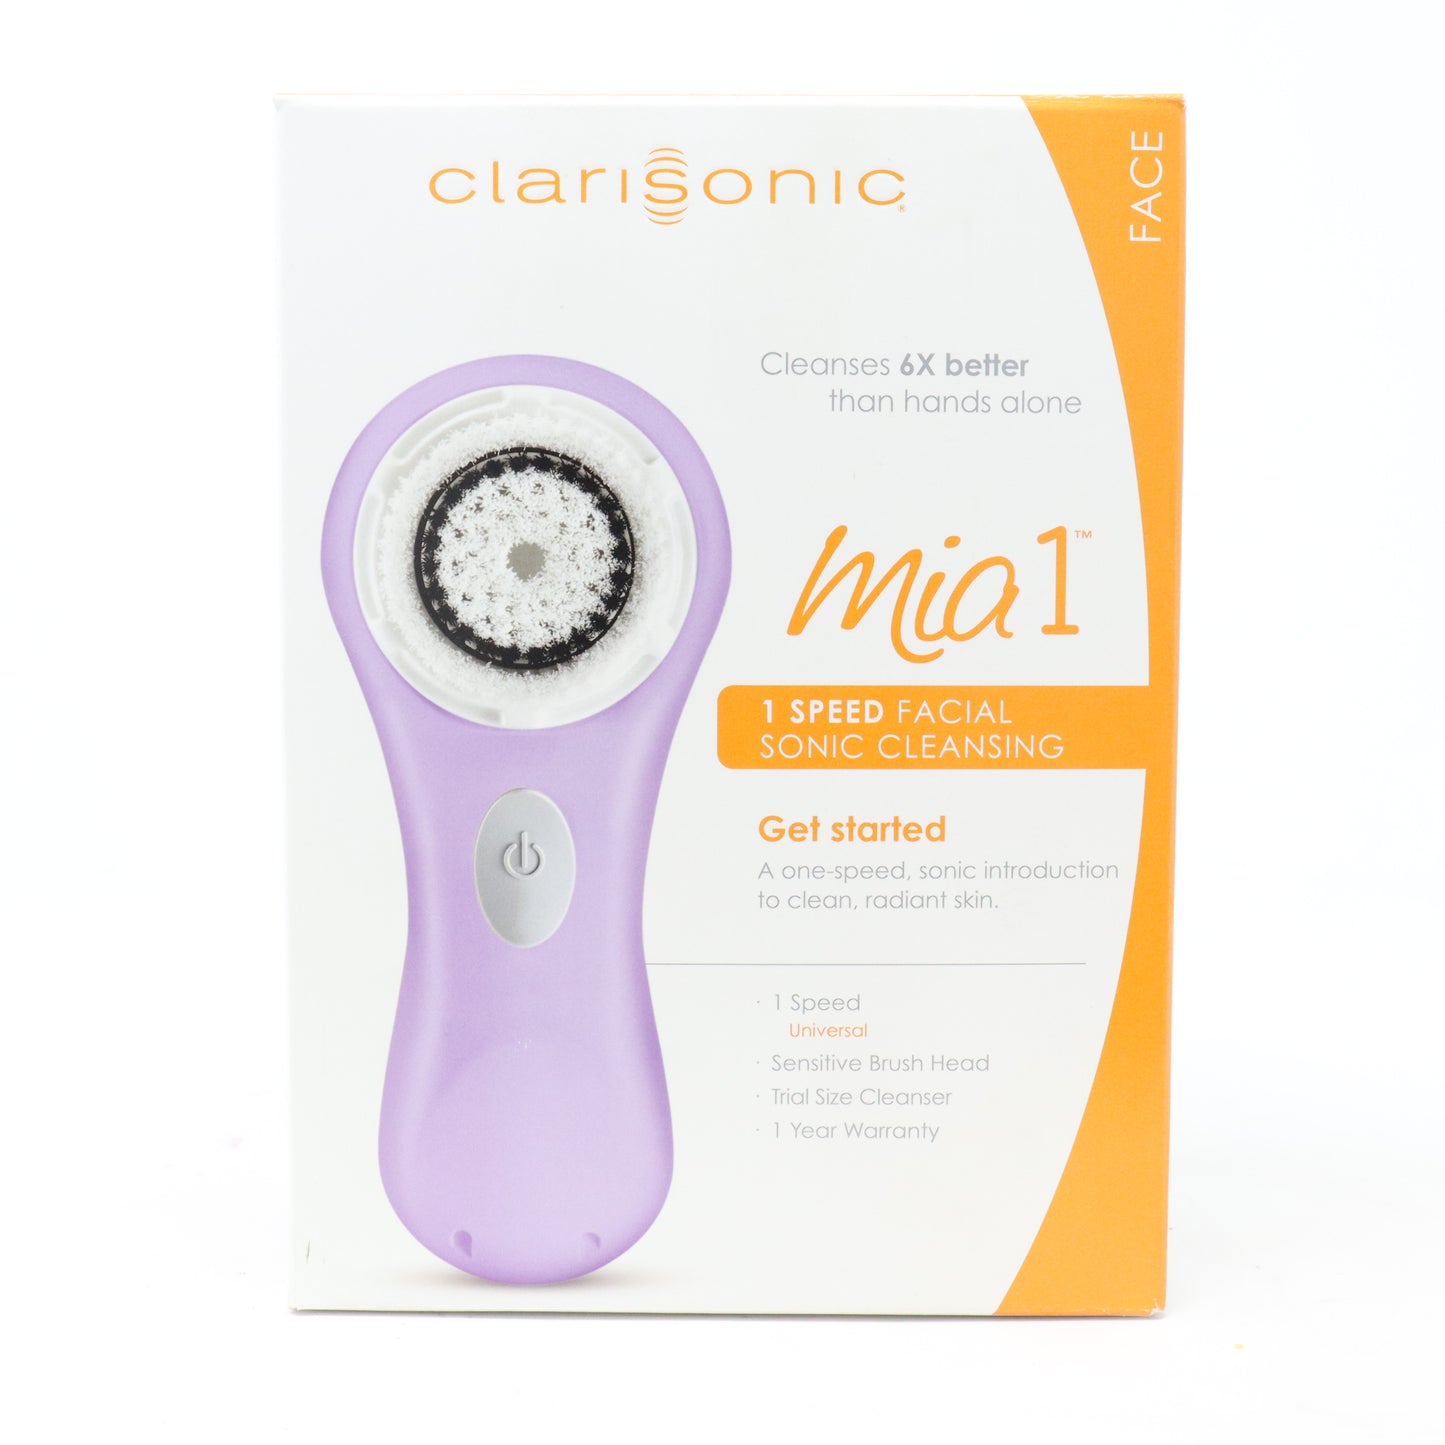 Mia 1 One Speed Facial Sonic Cleansing Set